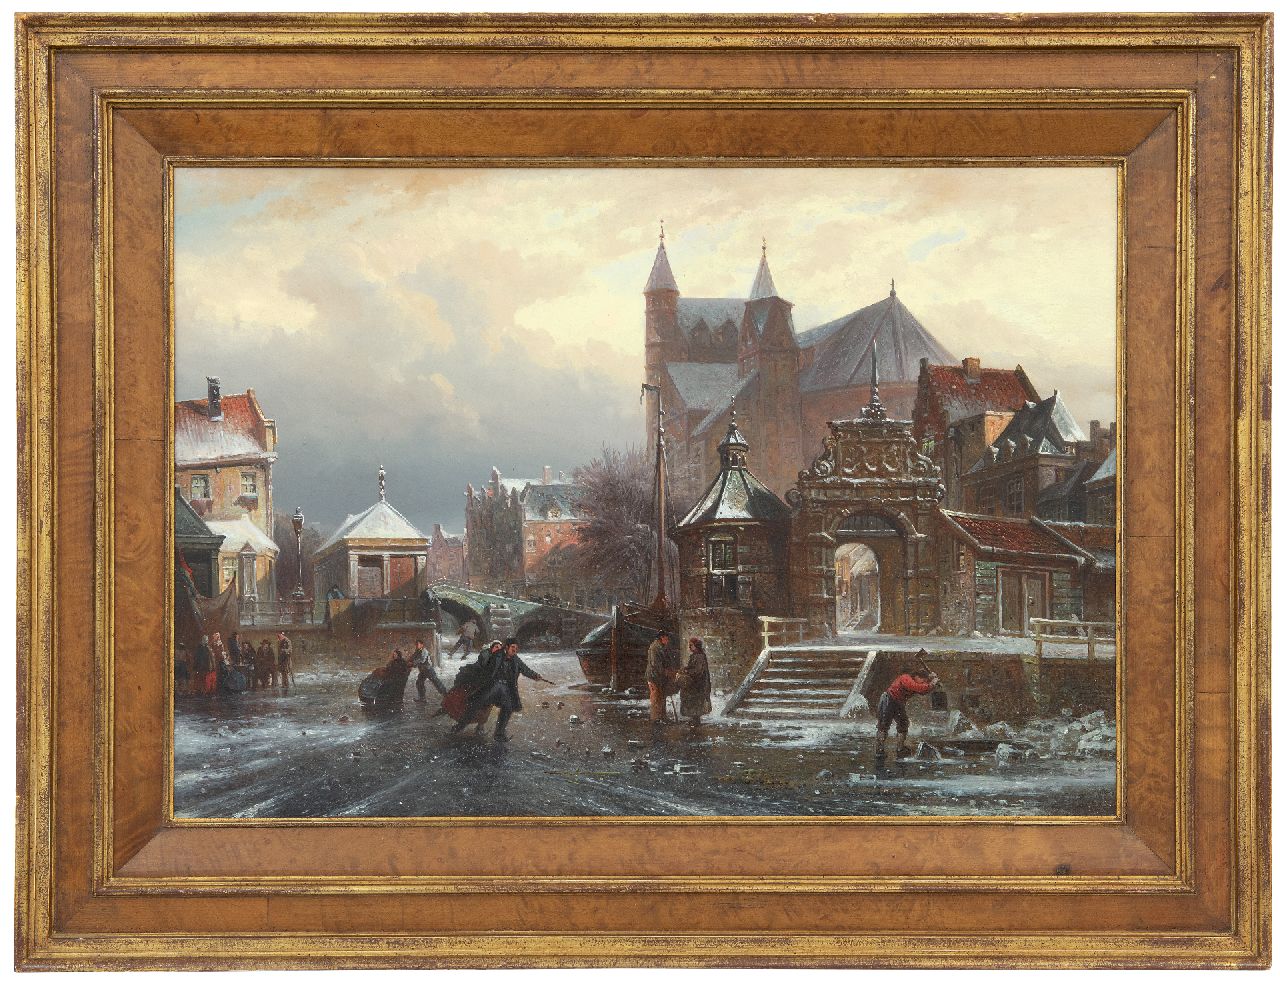 Bommel E.P. van | Elias Pieter van Bommel | Paintings offered for sale | Skating fun on a frozen canal in a town, oil on panel 36.7 x 54.4 cm, signed l.r. and dated '72 [?]